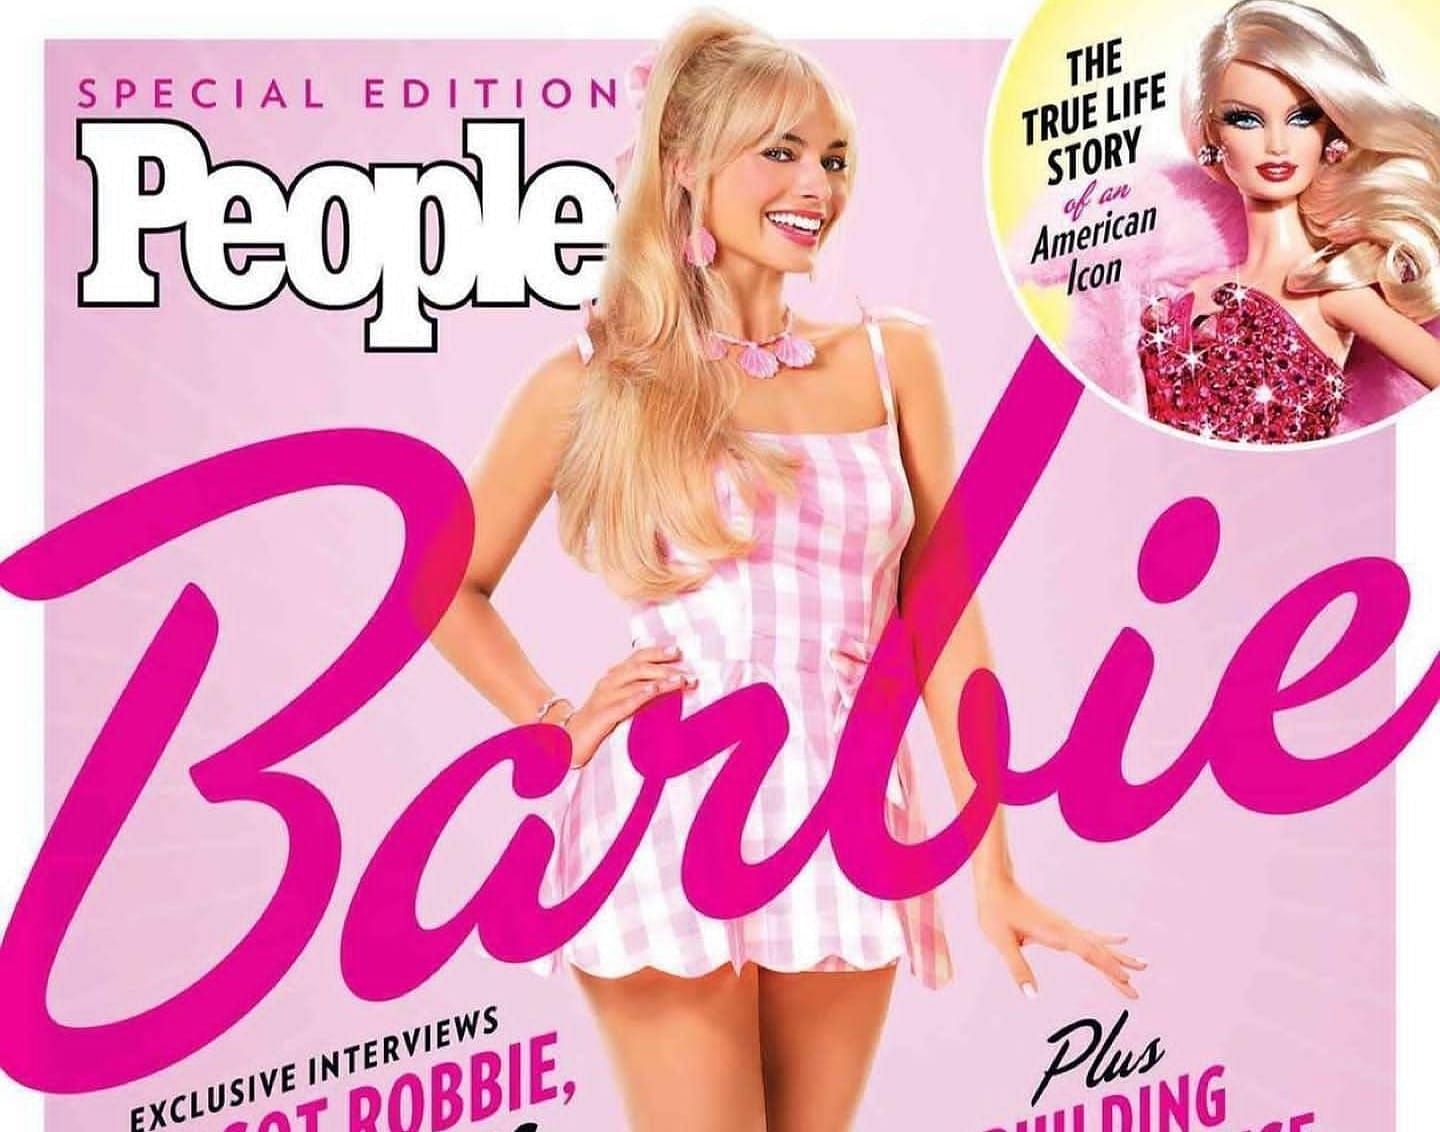 When will Barbie be released?